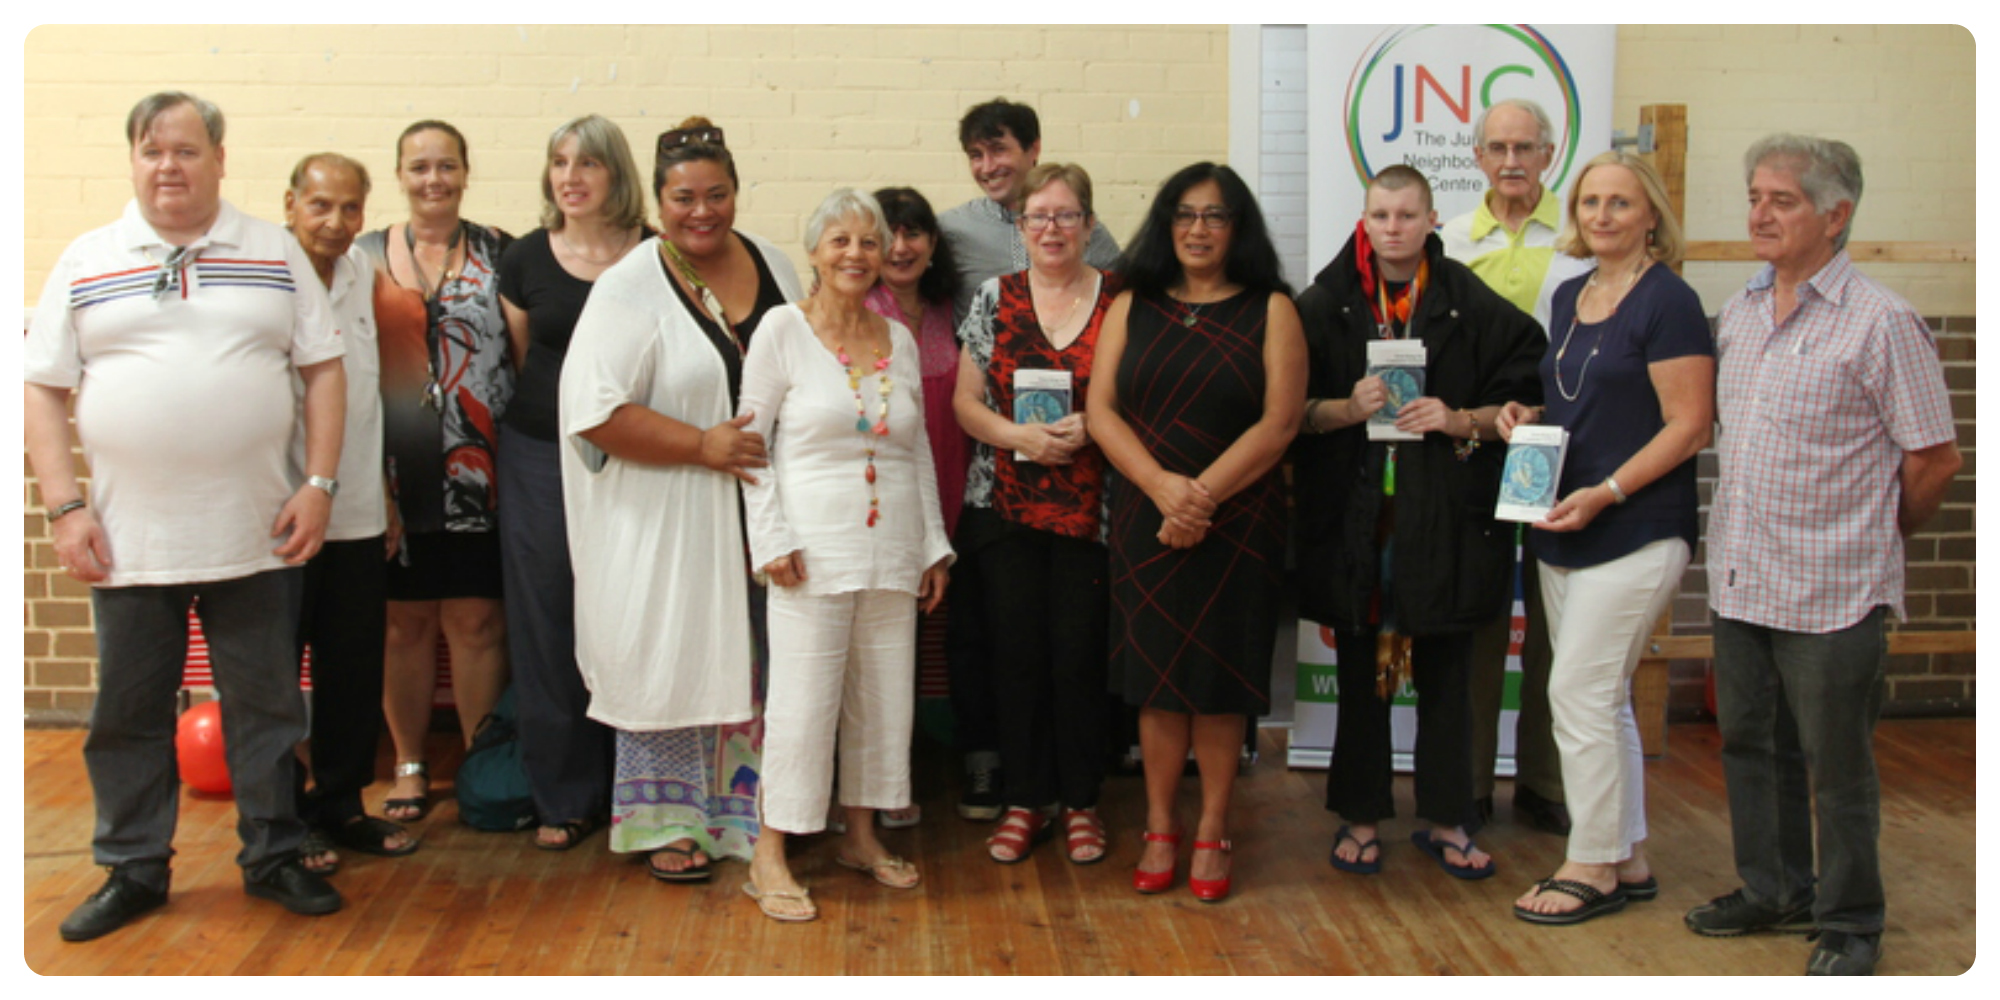 The JNC facilitated the Art of Creative Writing Group and in partnership with PIR, produced an anthology of impressive pieces.